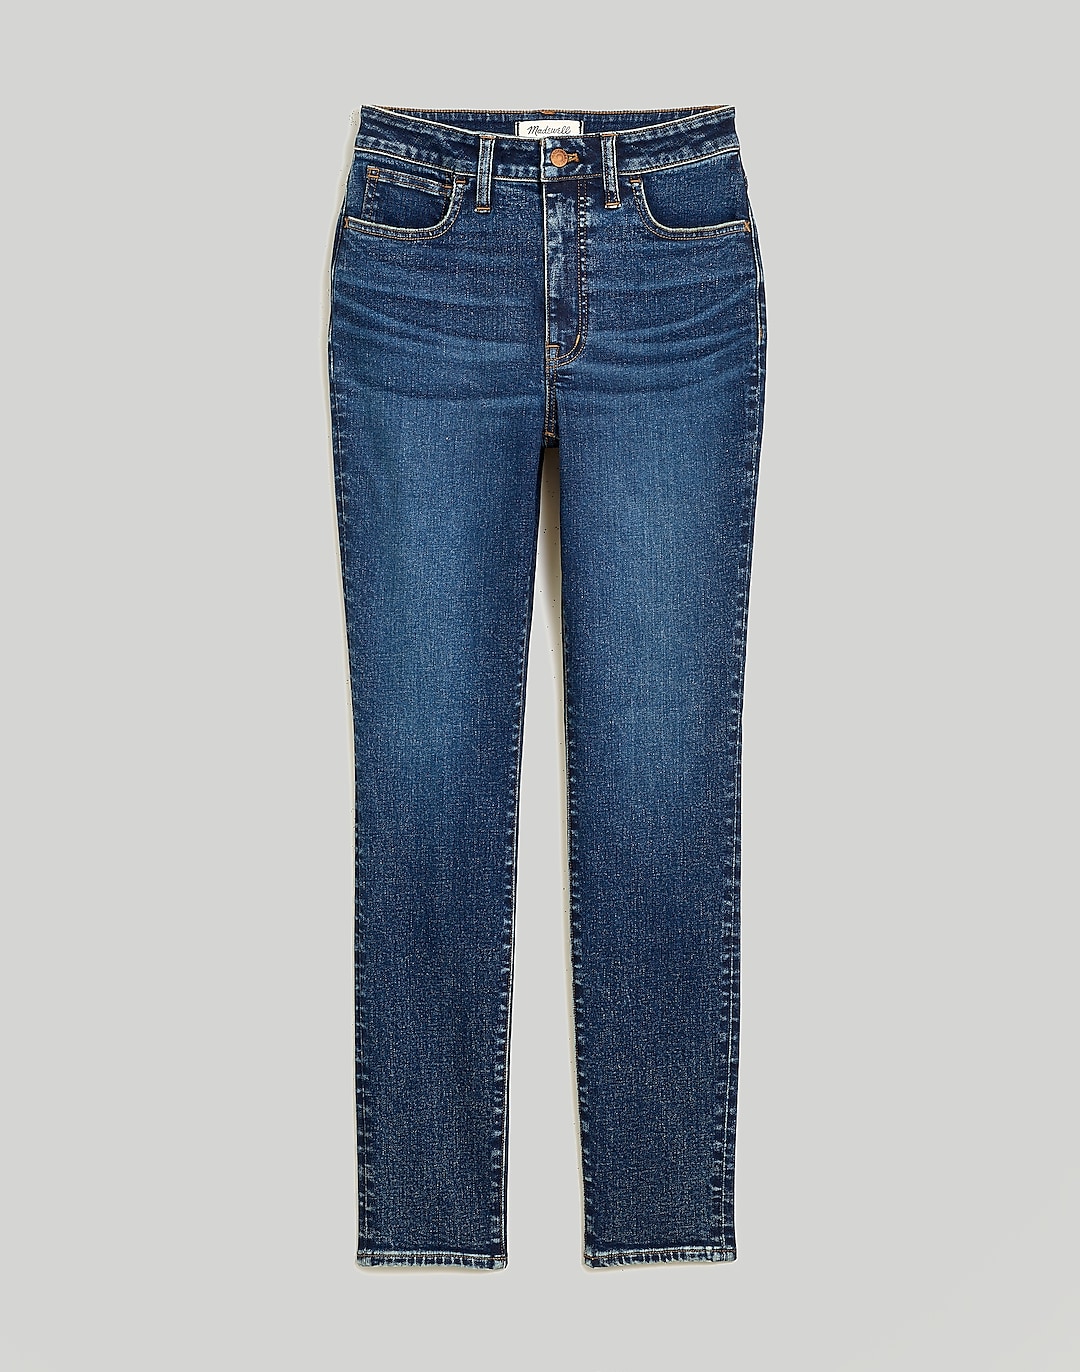 Plus Curvy Roadtripper Authentic Skinny Jeans in Litchfield Wash | Madewell